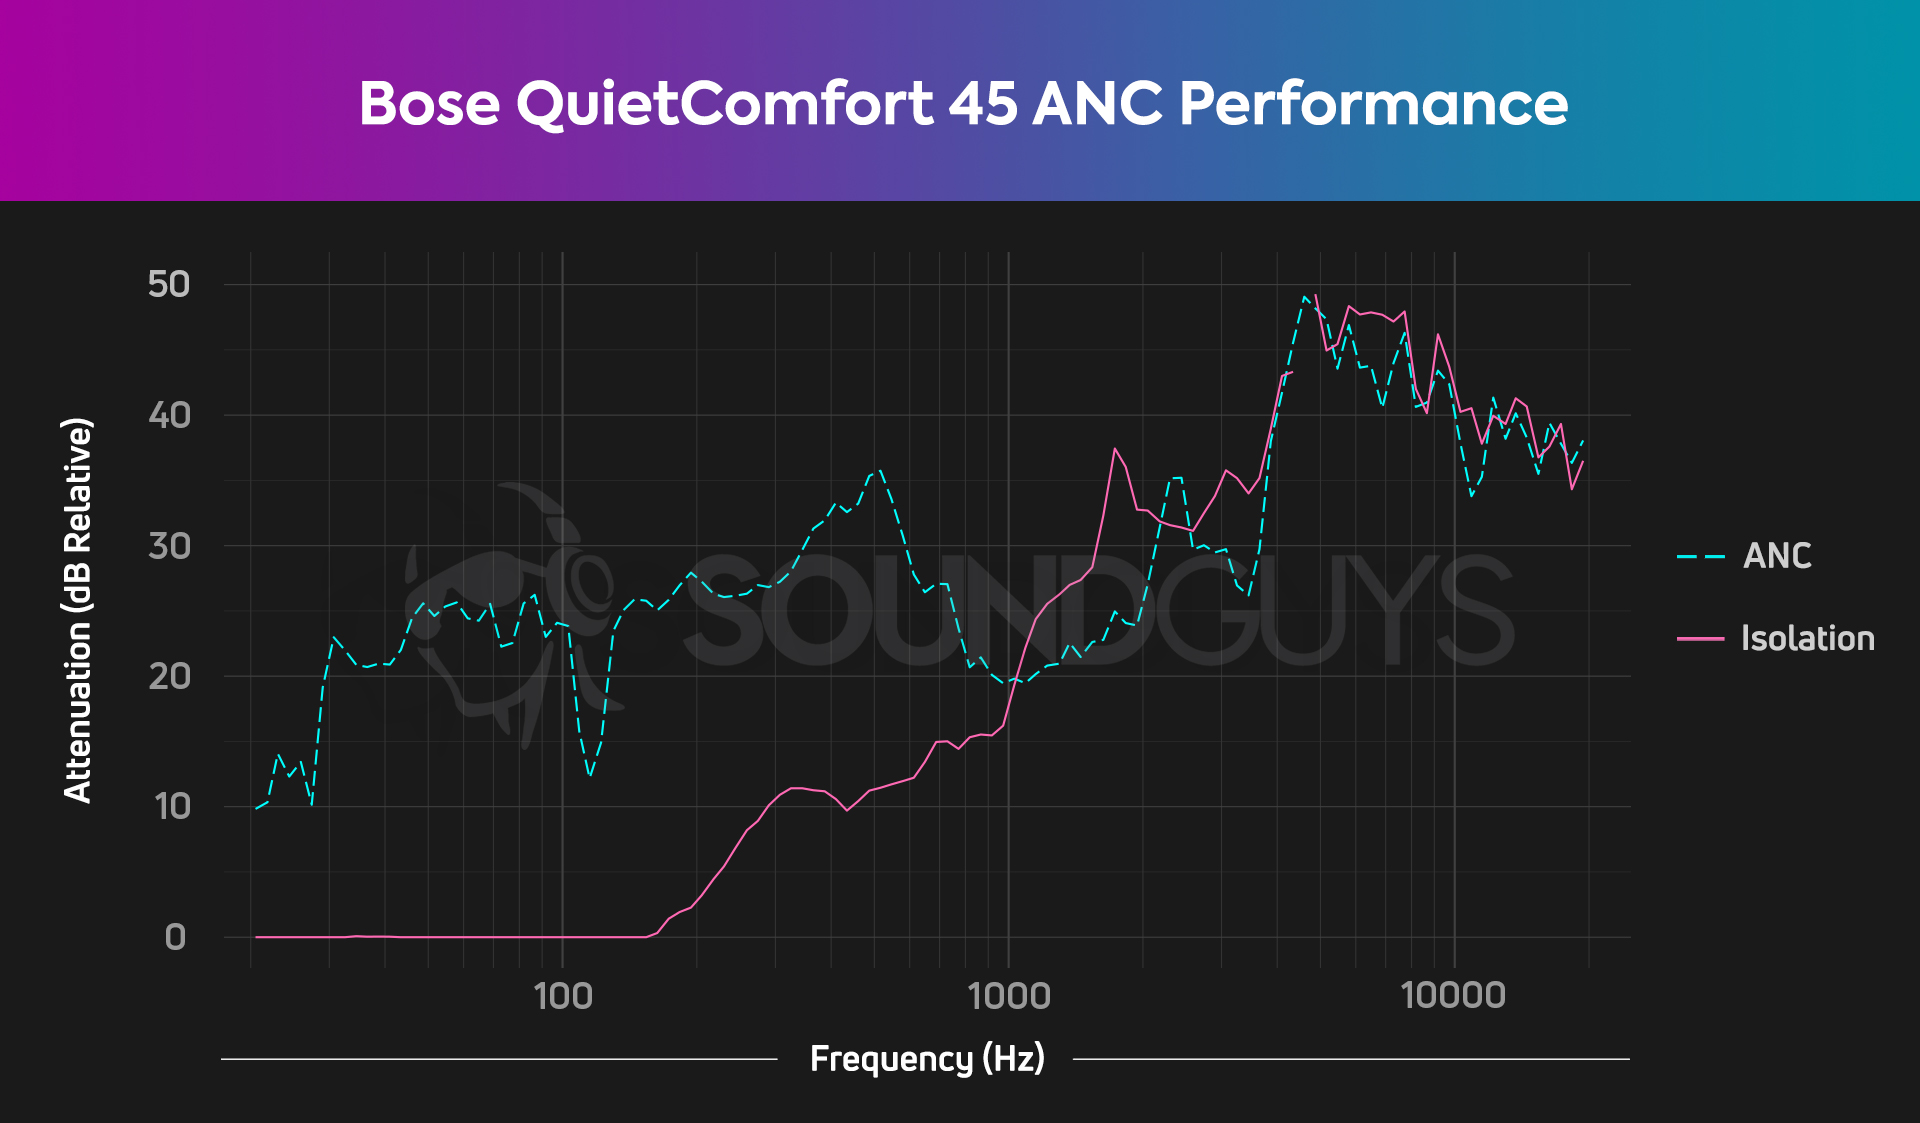 Diagram showing the performance of Bose QuietComfort 45 isolation and active noise cancellation.  The fairly high isolation and very high ANC performance stand out well through all frequencies.